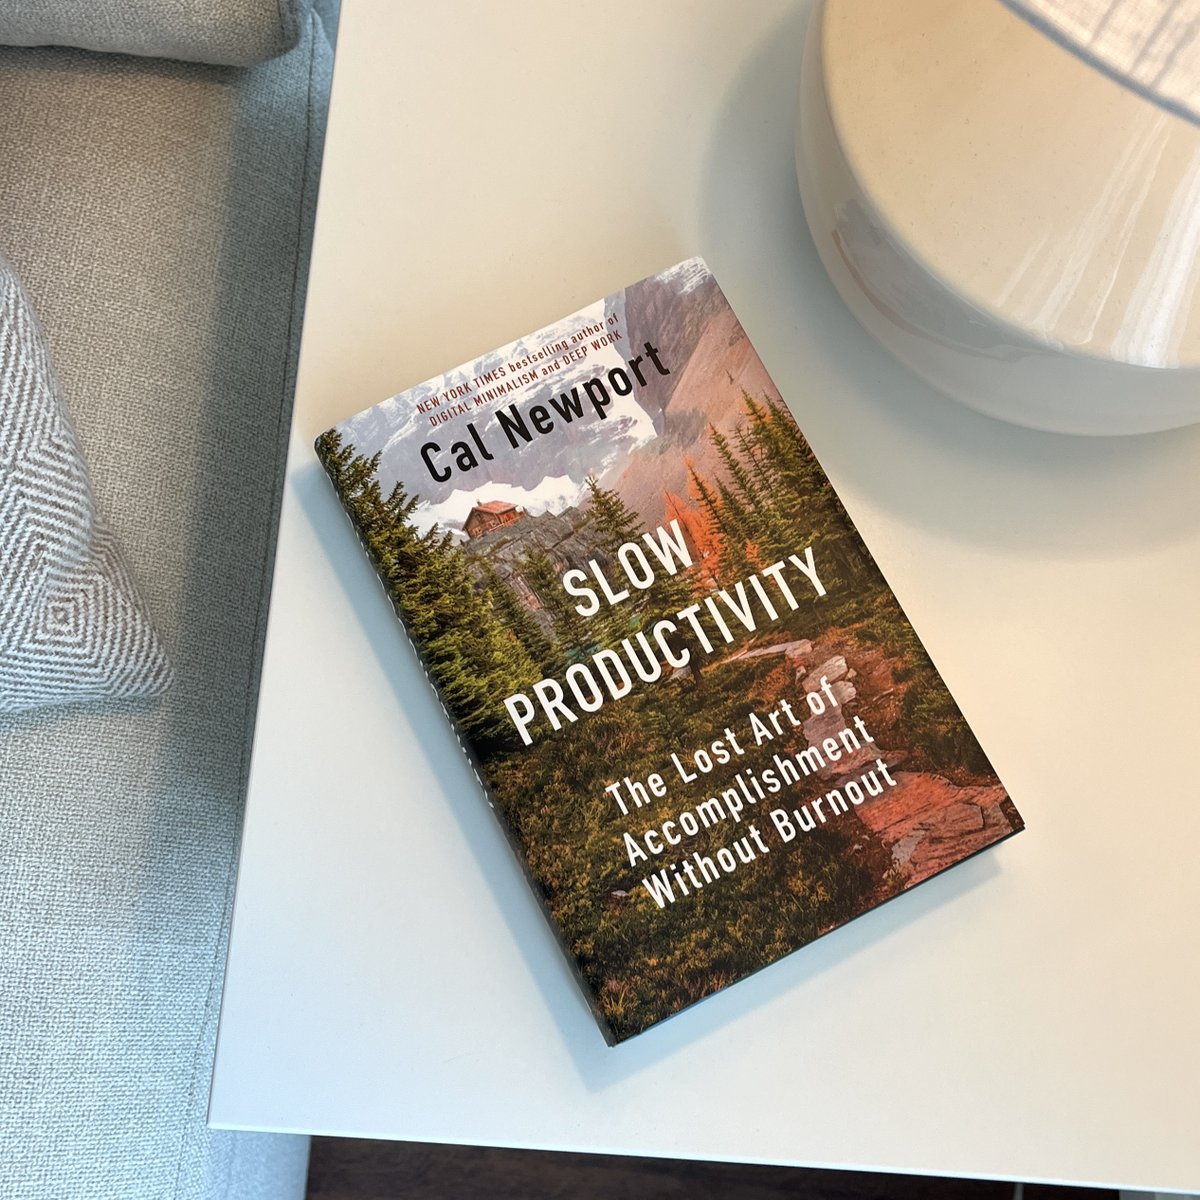 “Brilliant and timely” — Oliver Burkeman From rethinking workload management to introducing seasonal variation, NYT bestseller SLOW PRODUCTIVITY revolutionizes the world of work. 🌟 Join the movement and discover the power of a more sustainable, fulfilling work life. 💪💡